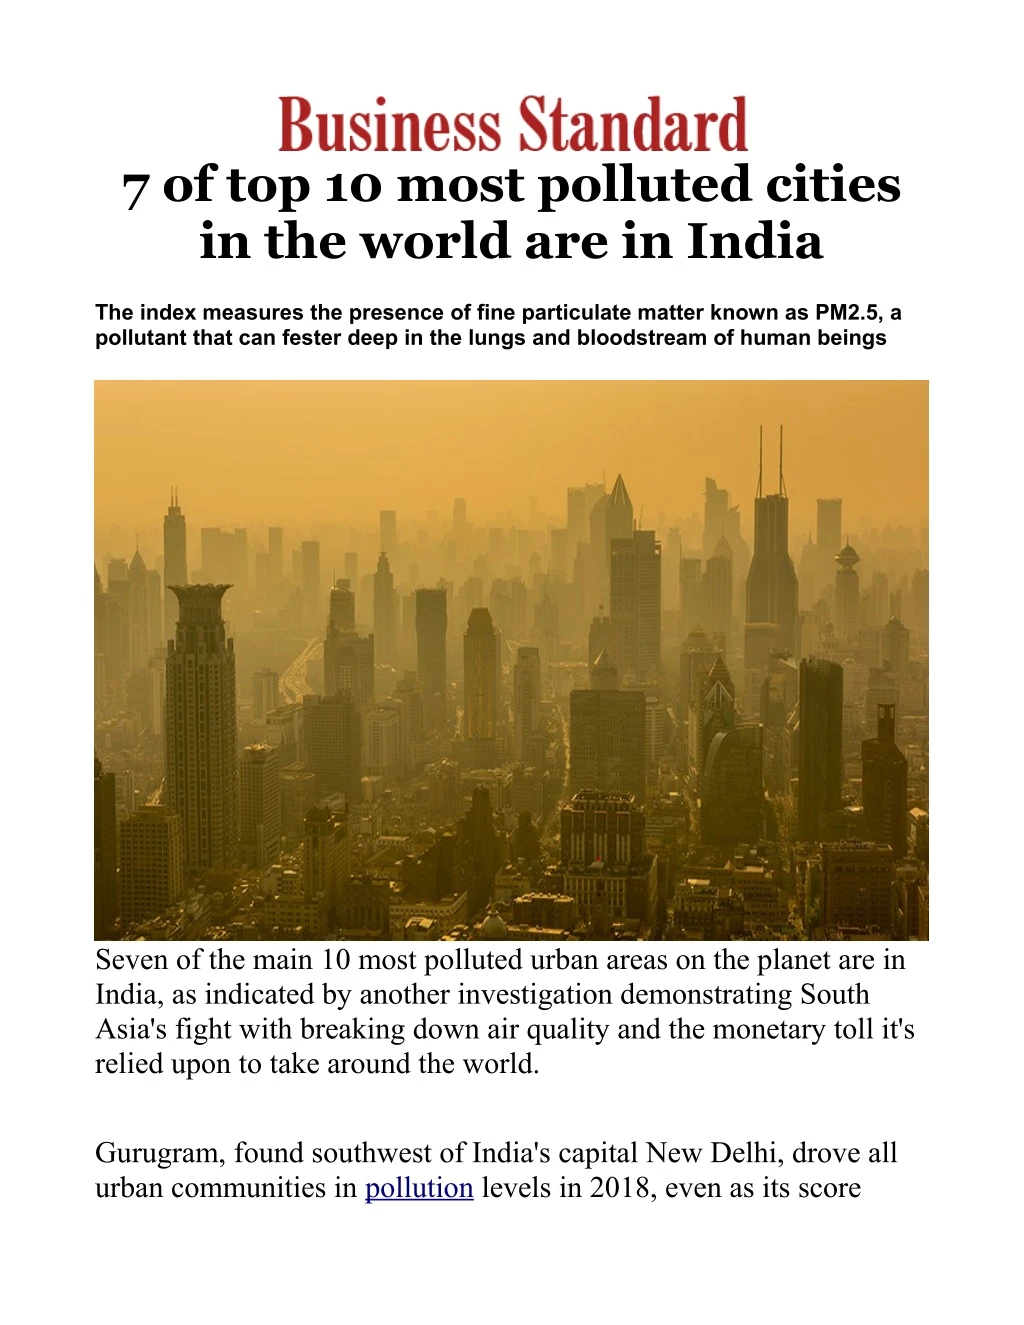 7 of top 10 most polluted cities in the world